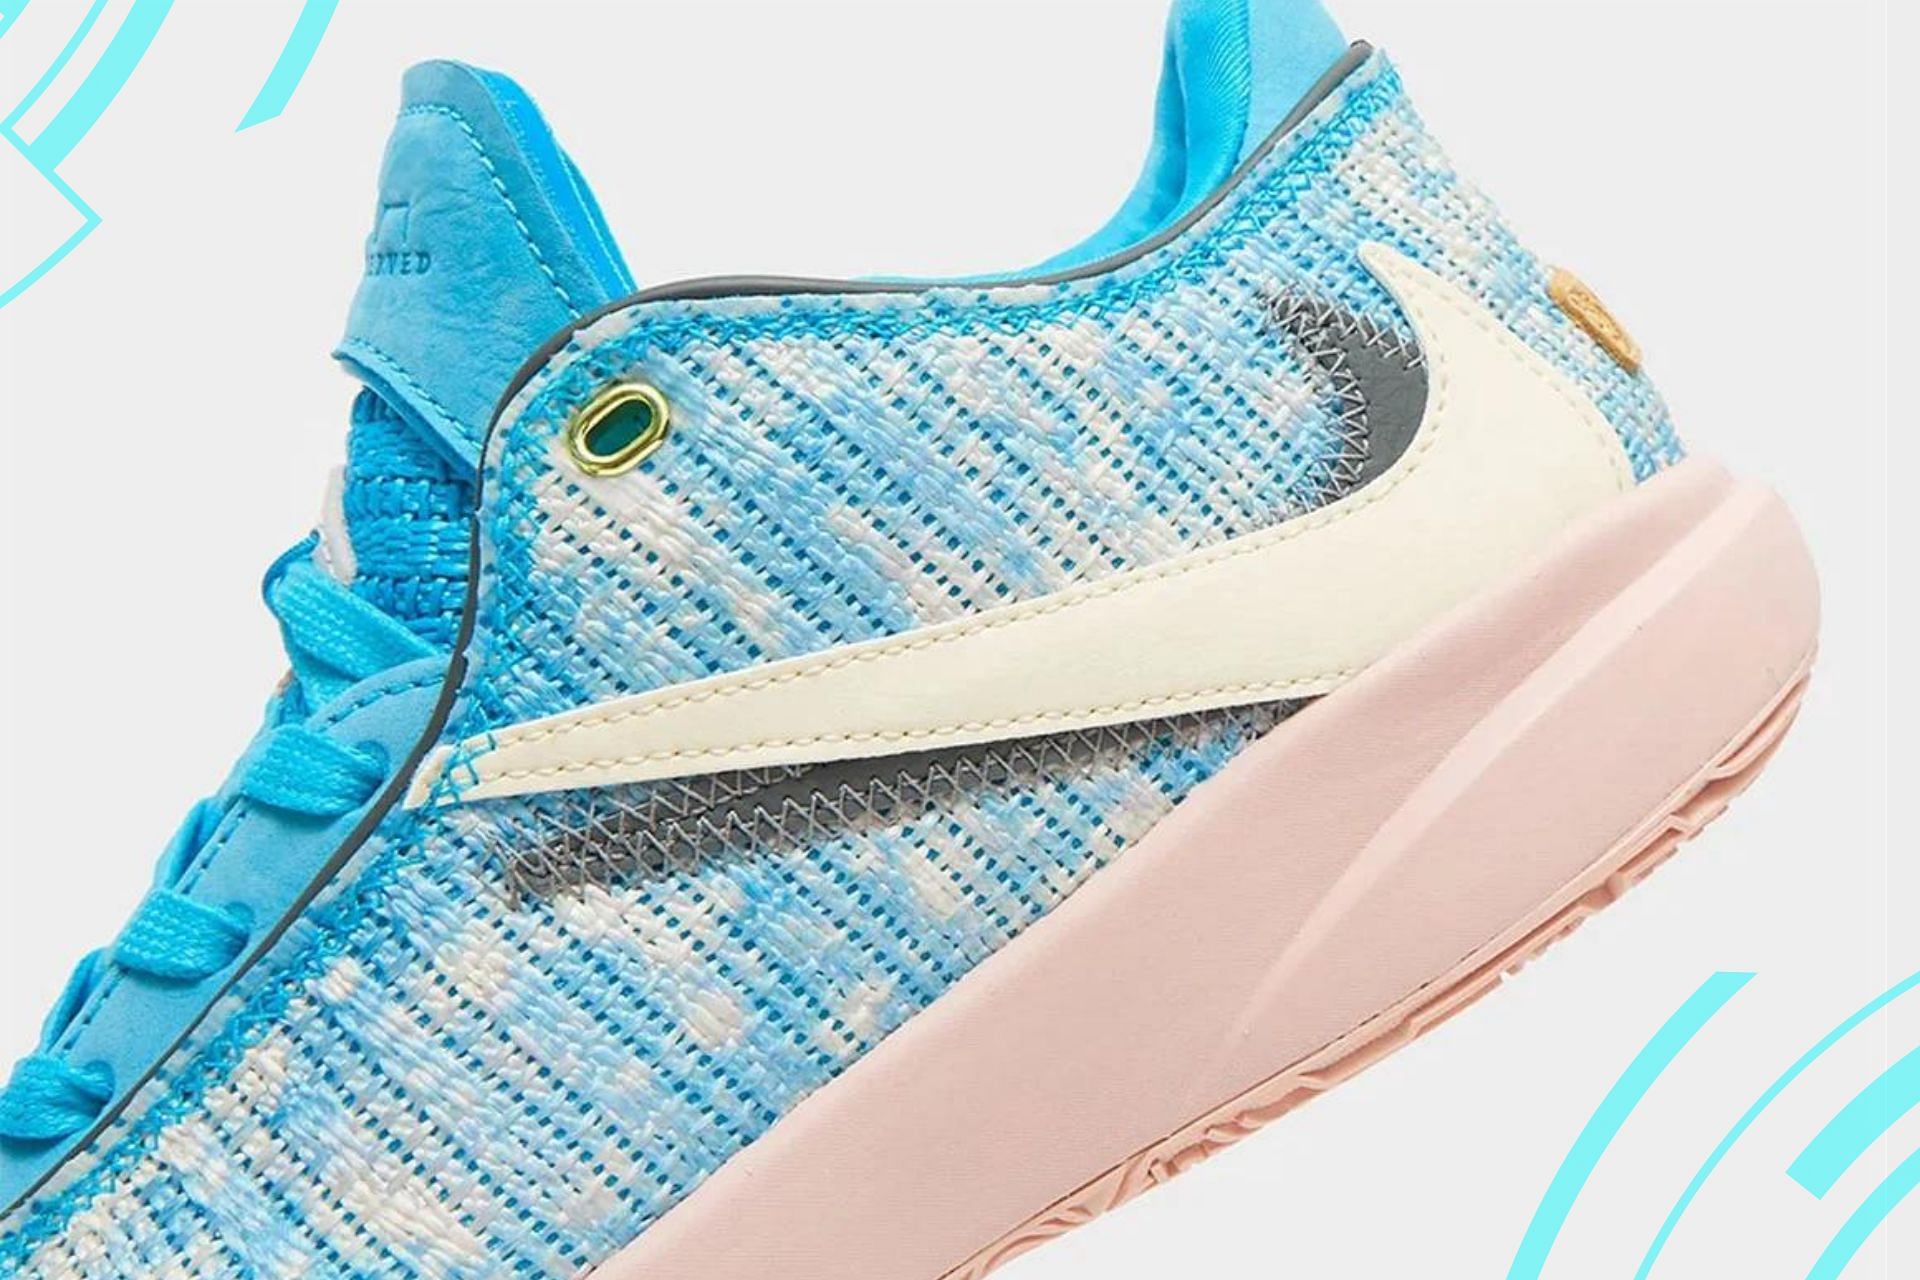 All-Star: Nike Lebron 20 “All-Star” Shoes: Where To Buy, Price, And More  Details Explored